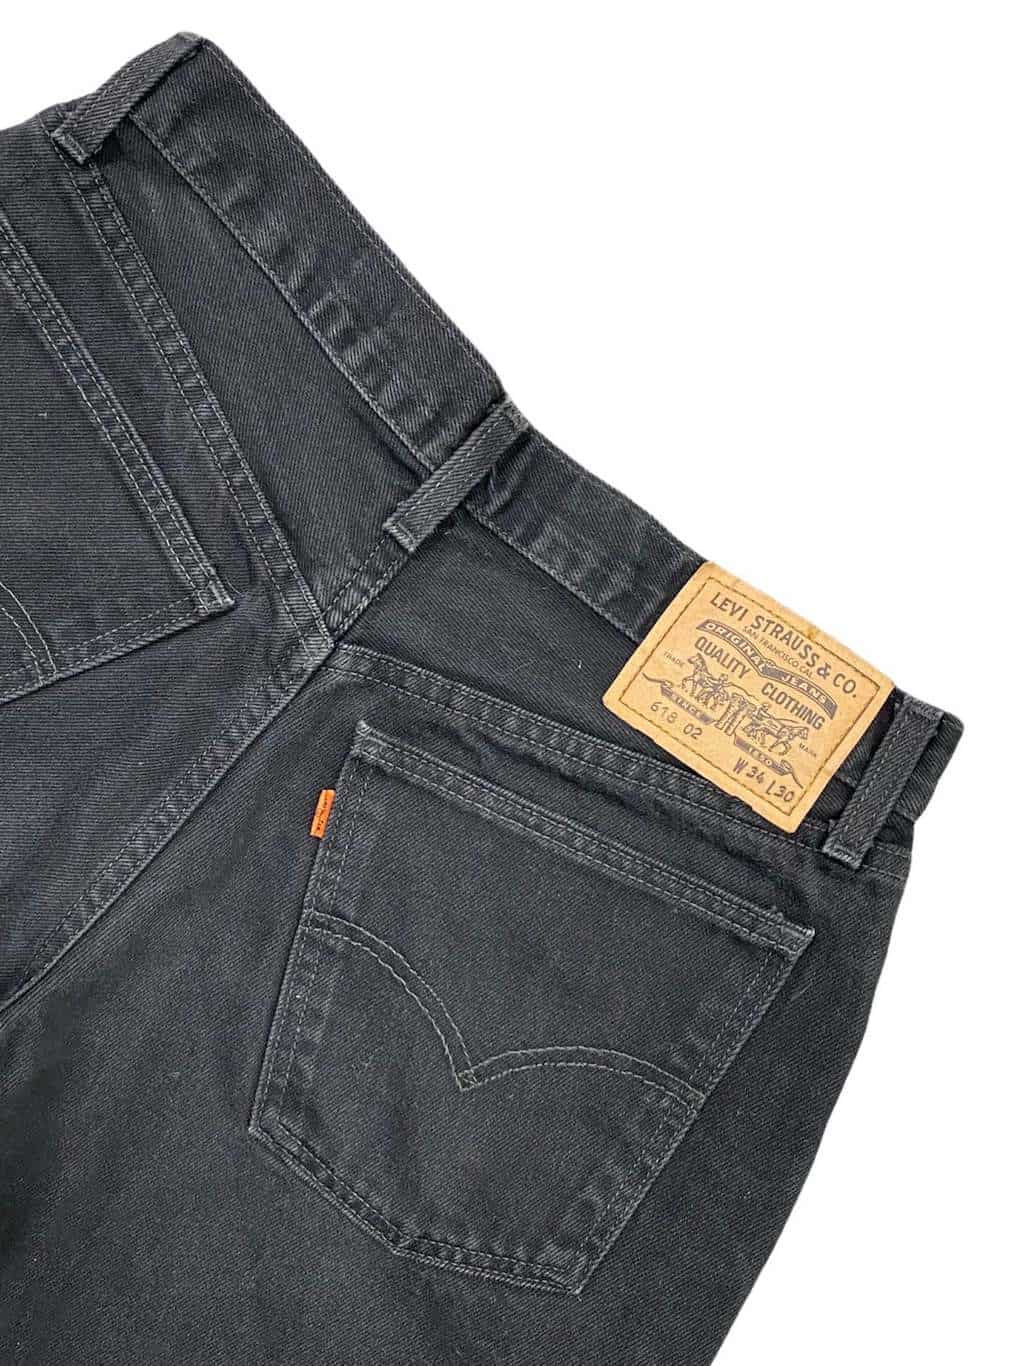 80s Levis vintage 618 jeans with orange tab, high waist, made in the UK -  W31 x L29